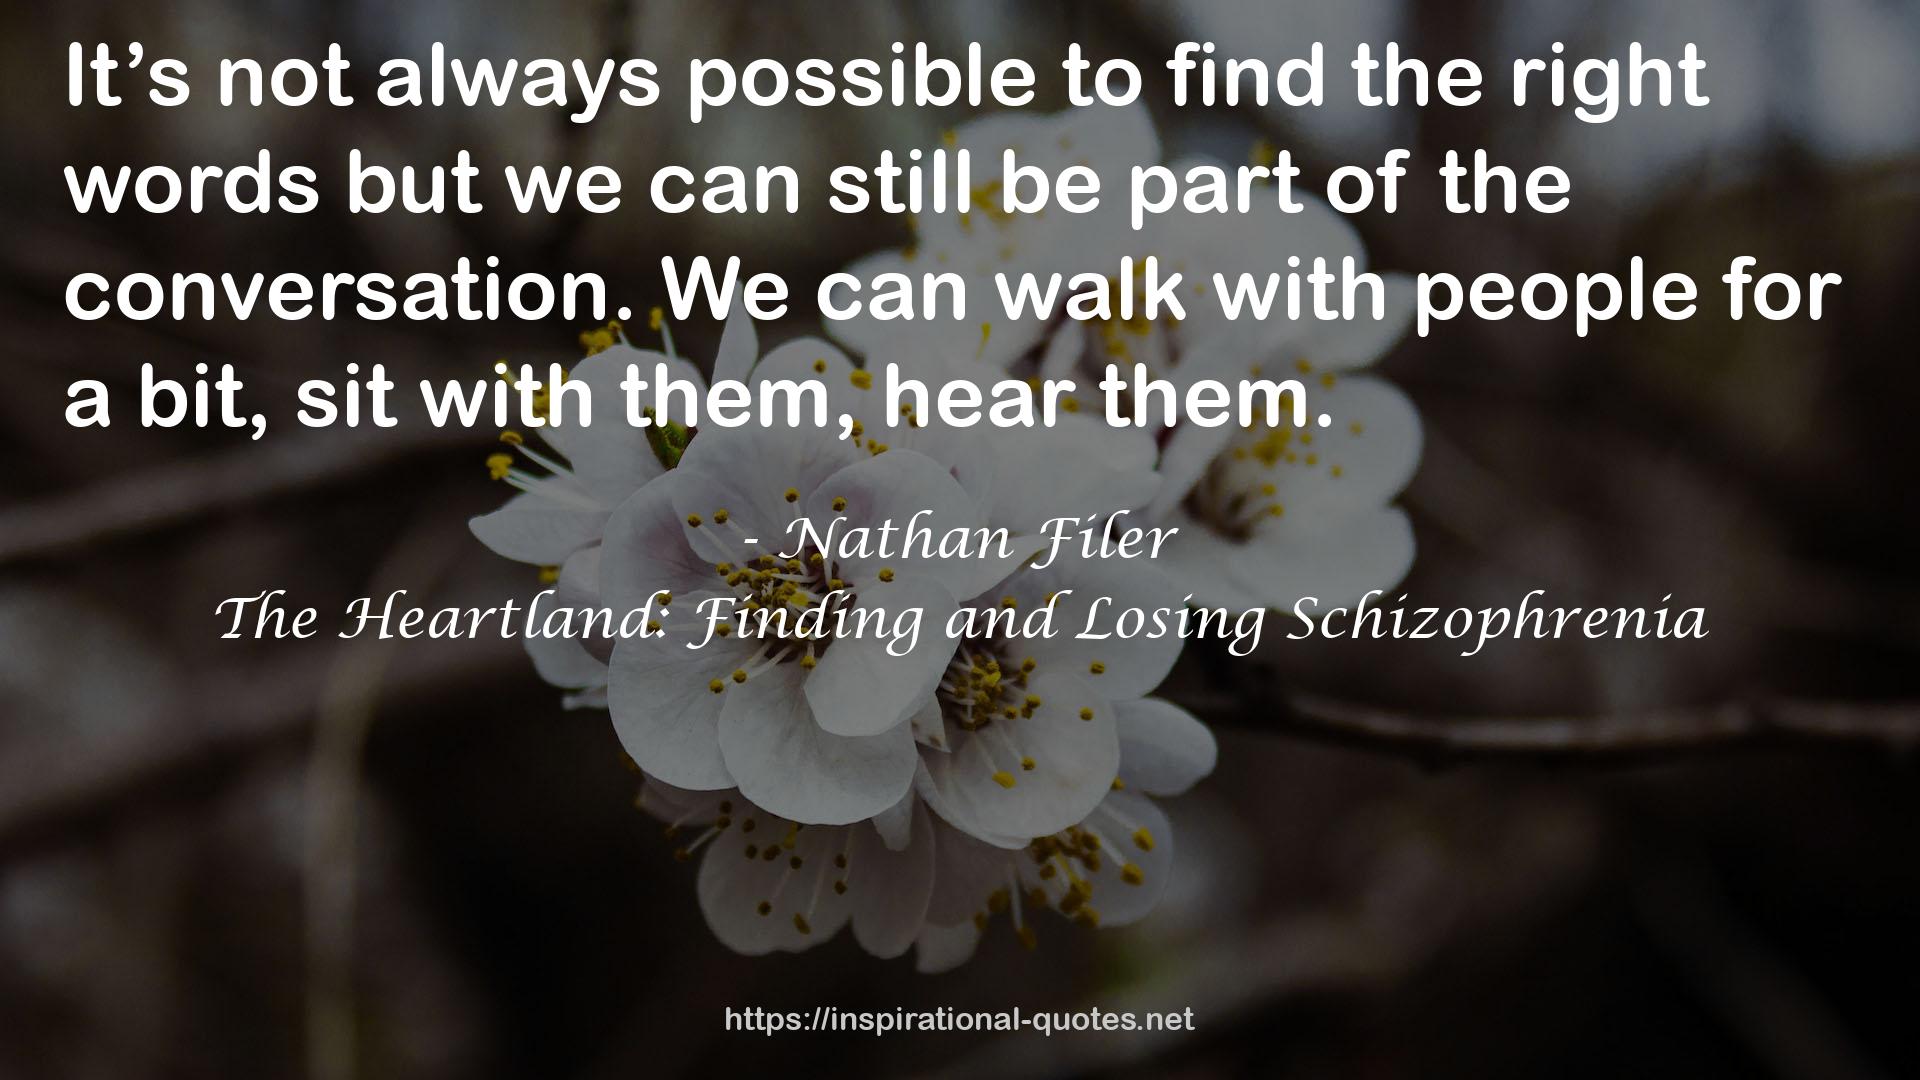 The Heartland: Finding and Losing Schizophrenia QUOTES